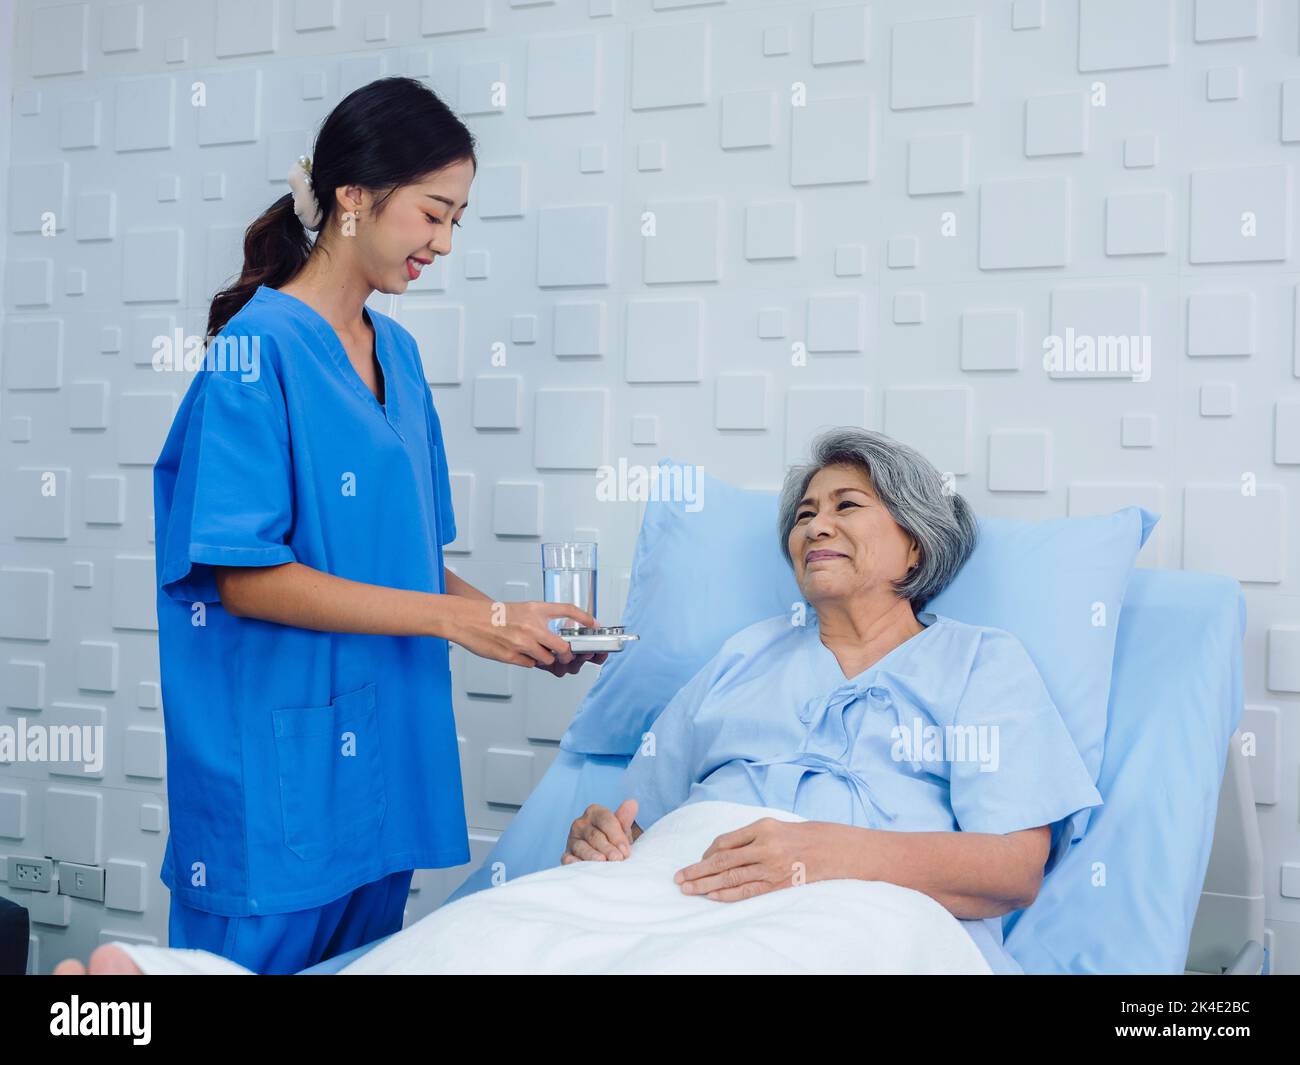 Friendly smiling young Asian nurse in blue scrub holding tray of pills for elderly patient lying on the bed in hospital room, taking medicine or vitam Stock Photo